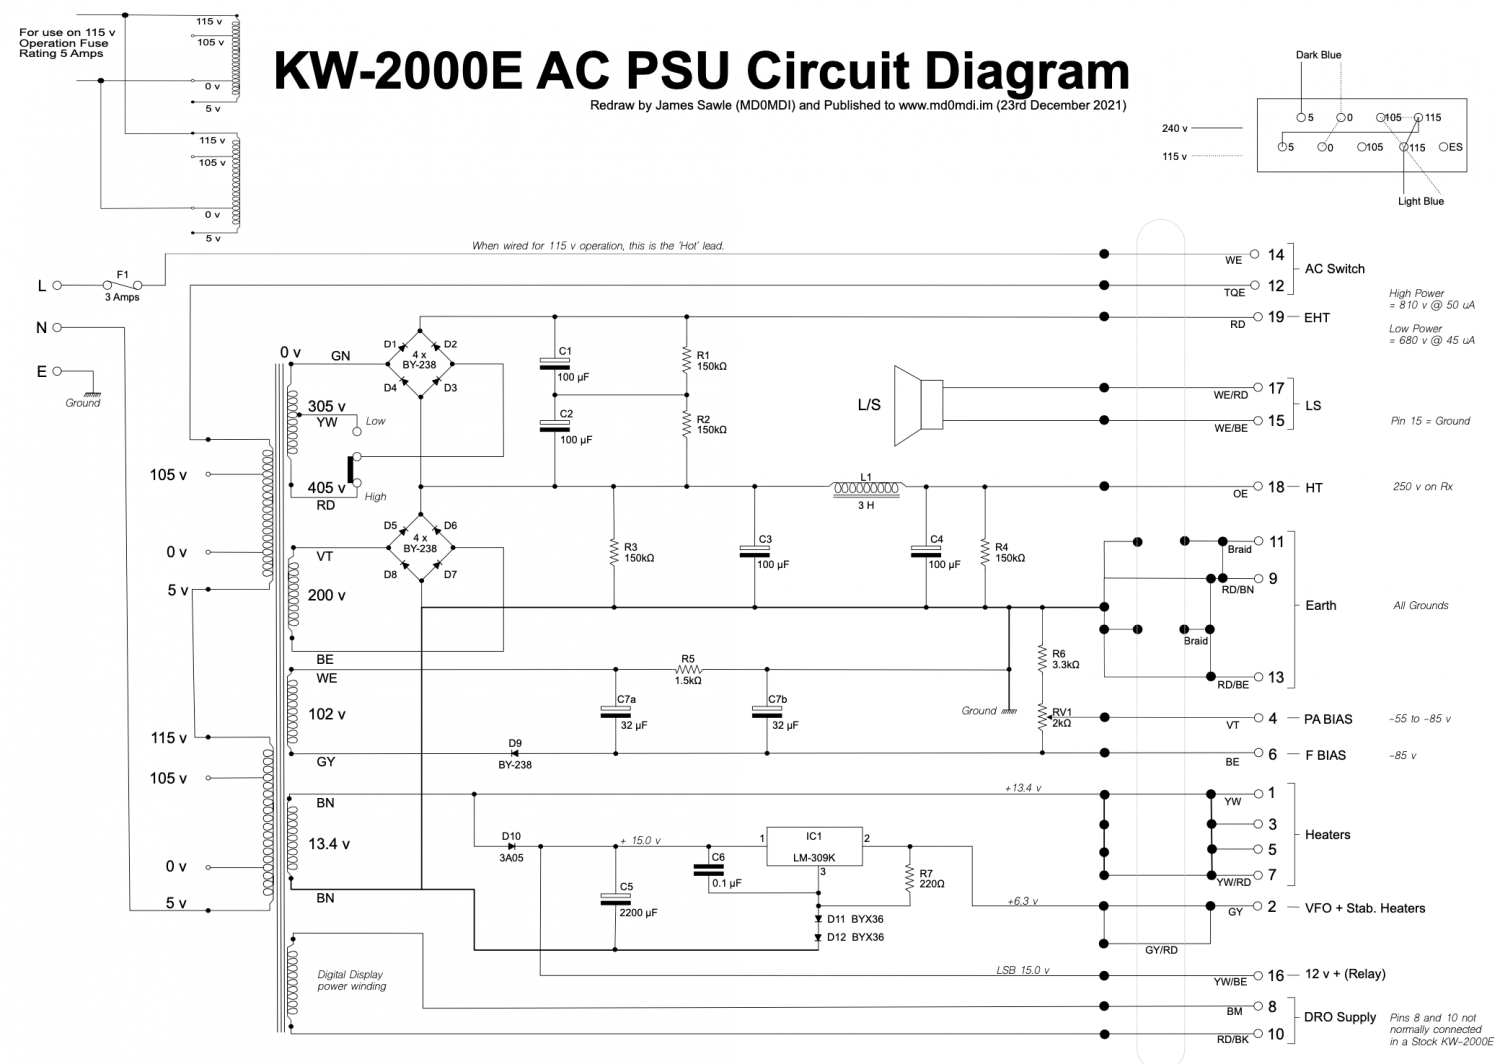 KW-2000E - Power Supply Schematic (By MD0MDI)